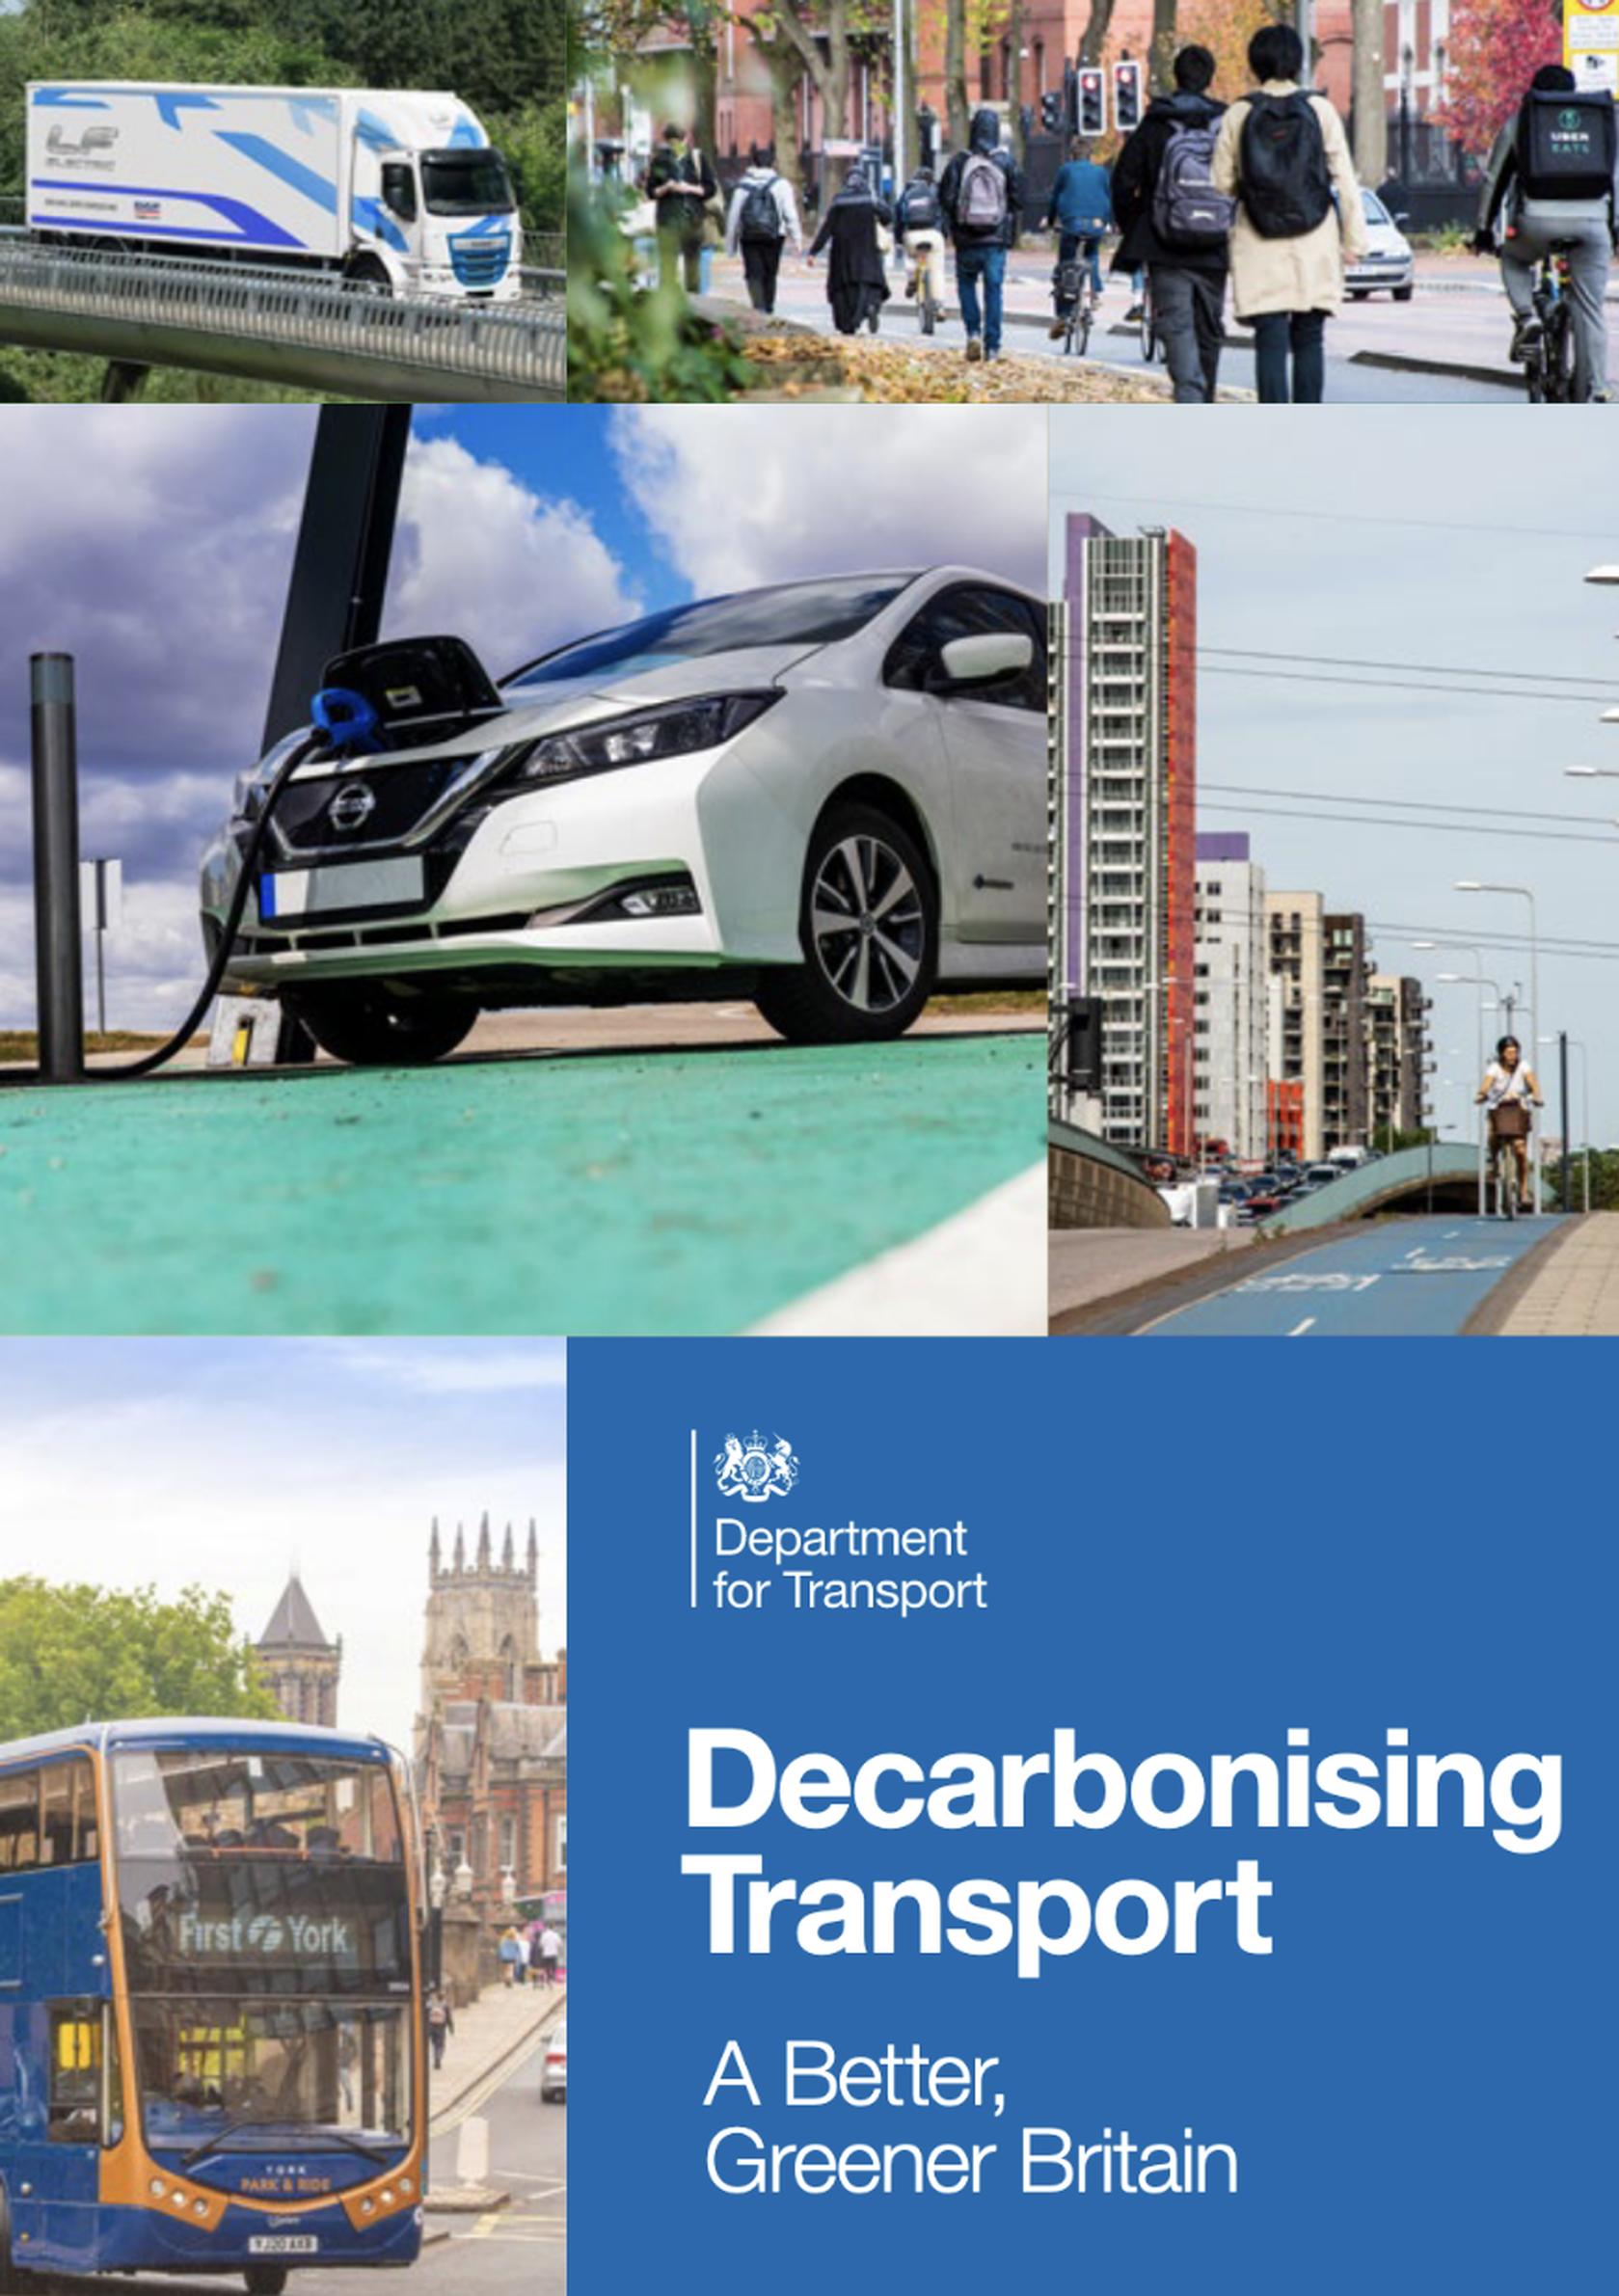 The Transport Decarbonisation Toolkit is designed to help deliver the aims of the Transport Decarbonisation Plan